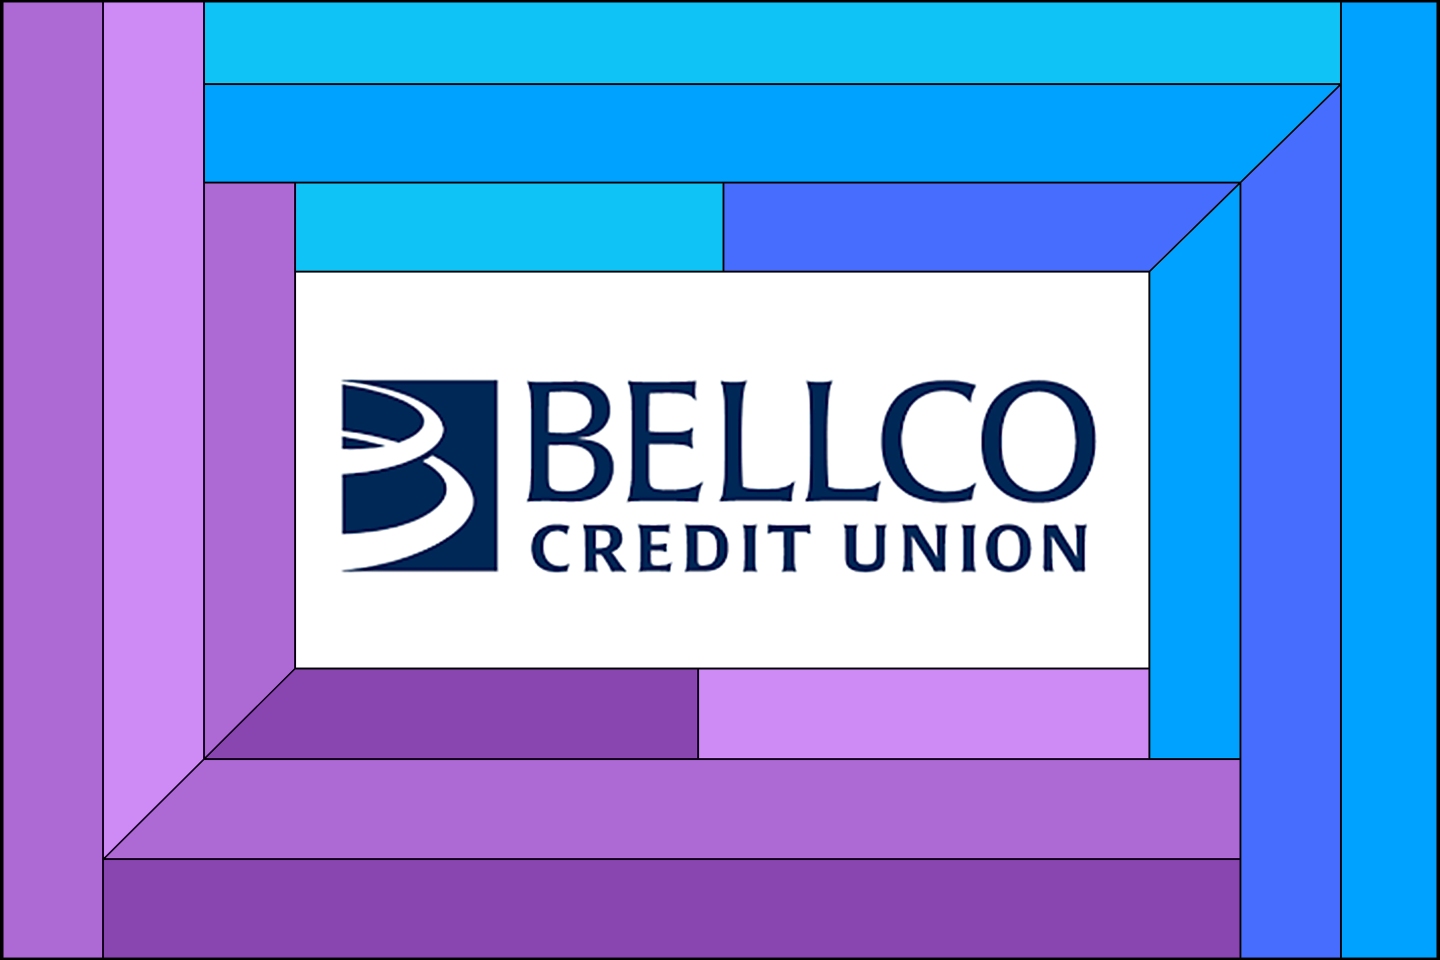 Illustration of the Bellco Credit Union logo surrounded by a blue and purple frame.